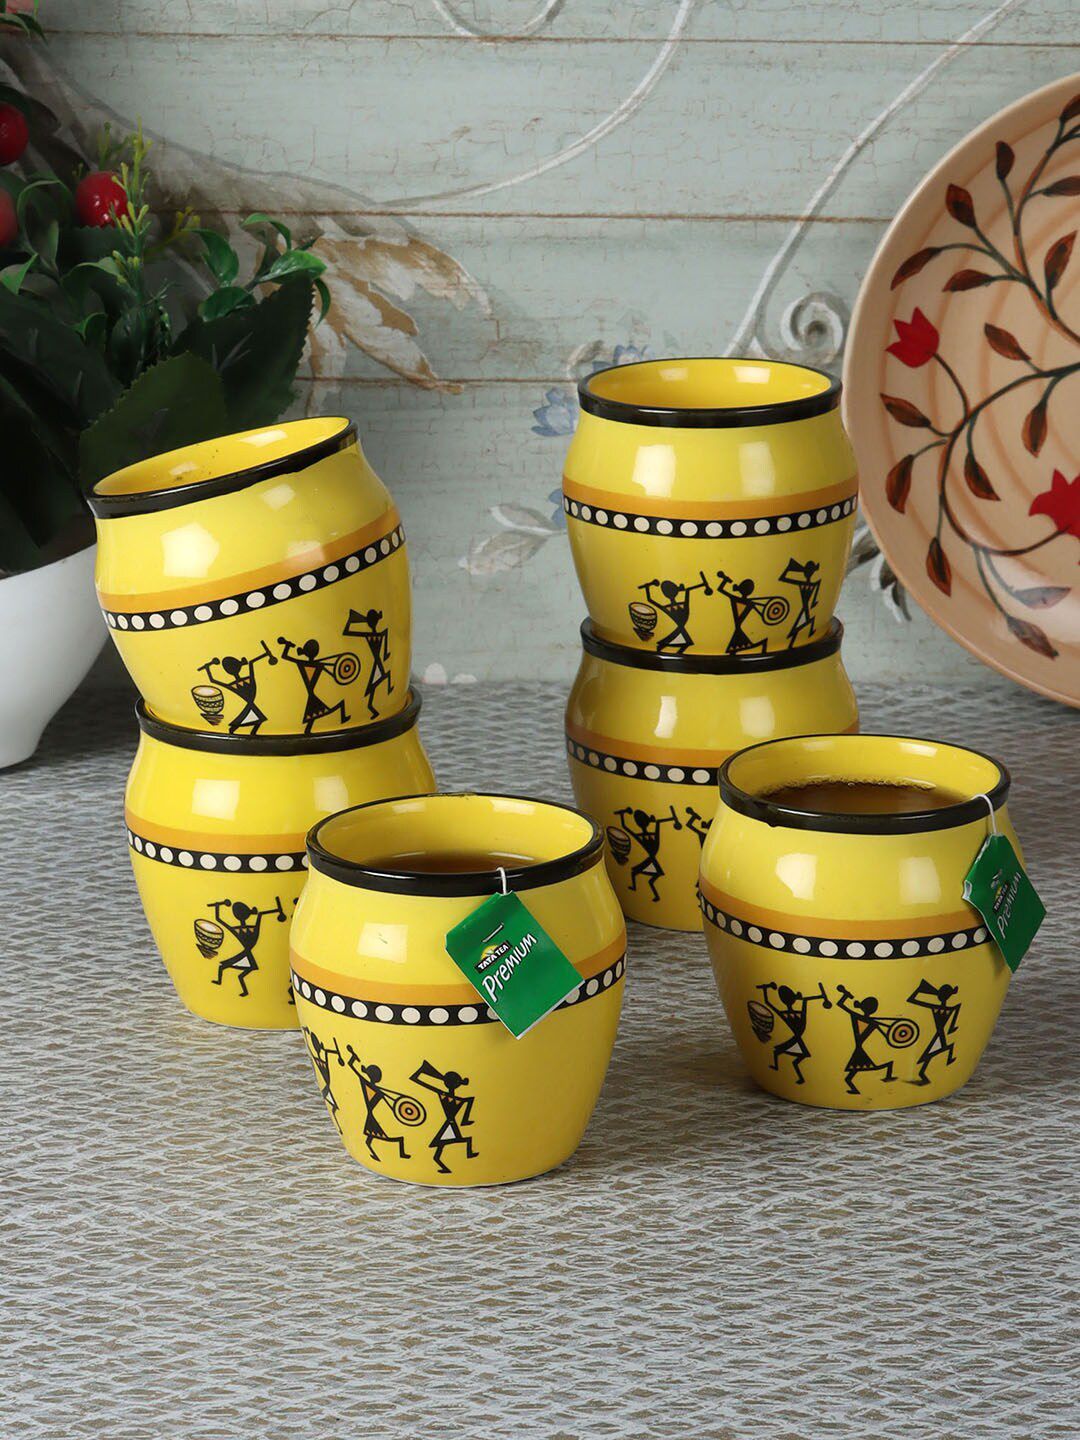 CDI Yellow & Black Printed Ceramic Glossy Kulladhs Set of 7 With Wooden Tray Price in India